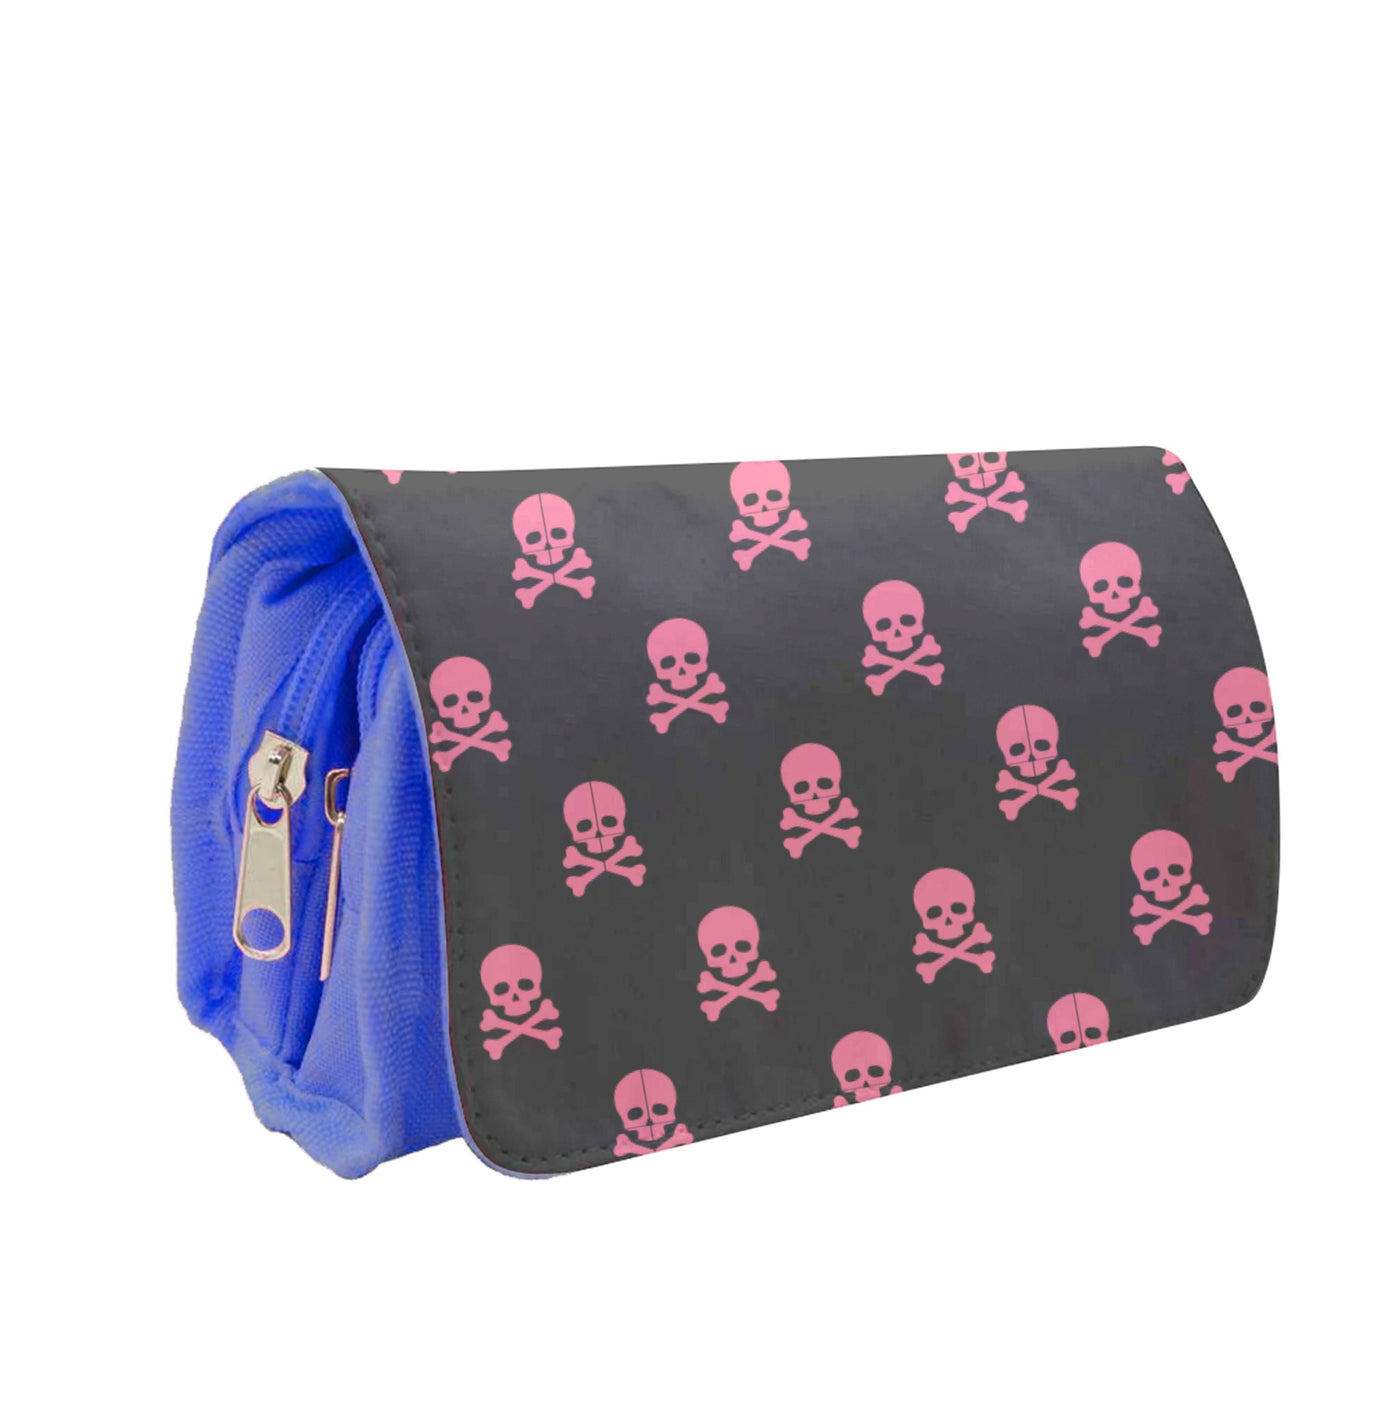 Whats Your Poison - Halloween Pencil Case